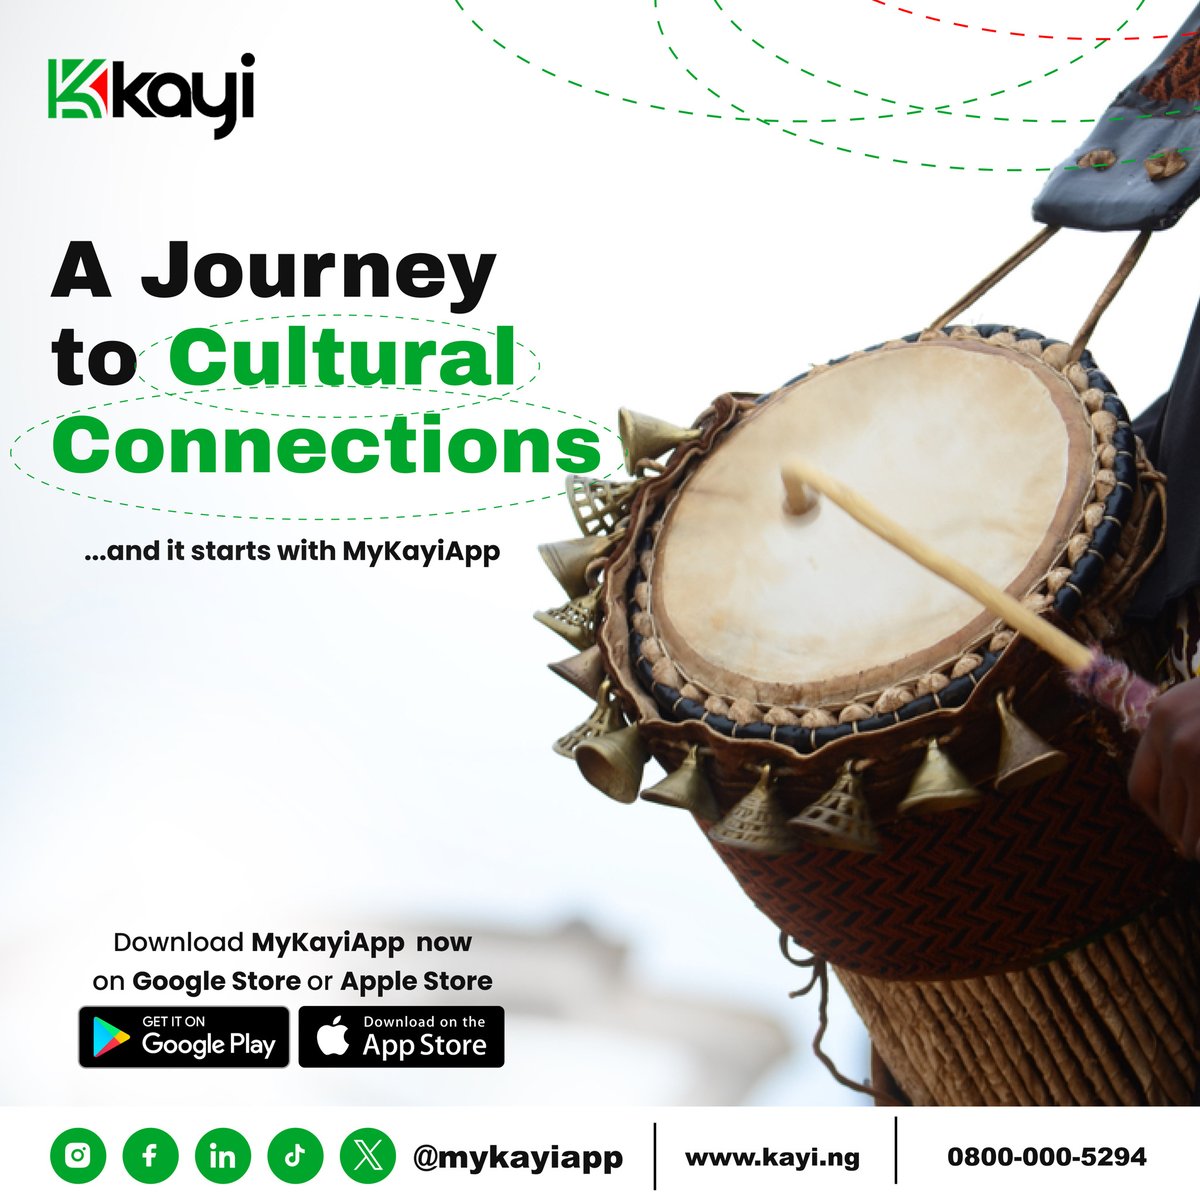 MyKayiApp is your gateway to cultural connections. Immerse yourself in the traditions and heritage of Nigeria. Download MyKayiApp now on Google Store or Apple Store.

#MyKayiApp #NowLive #Kayiway #DownloadNow #Bankingwithoutlimits #downloadmykayiapp